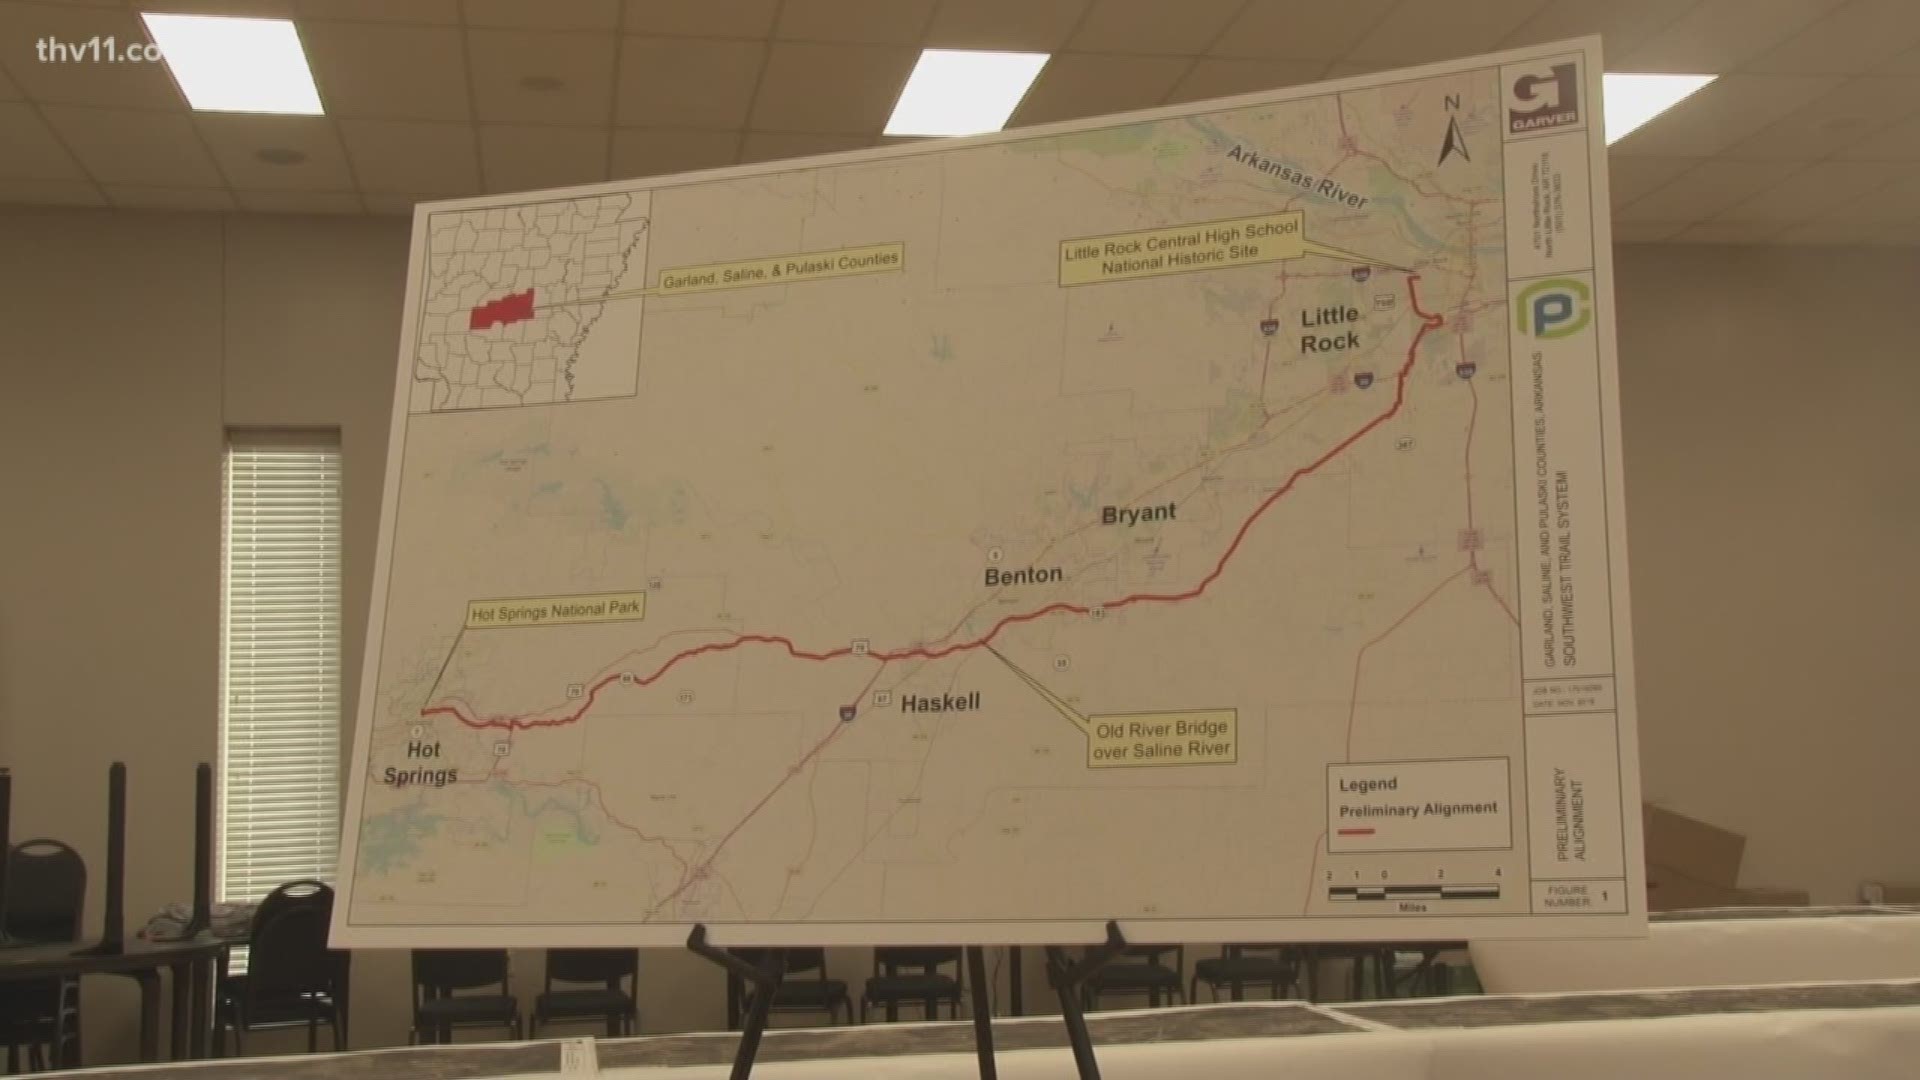 A multi-million dollar transportation project is getting another public hearing this week.